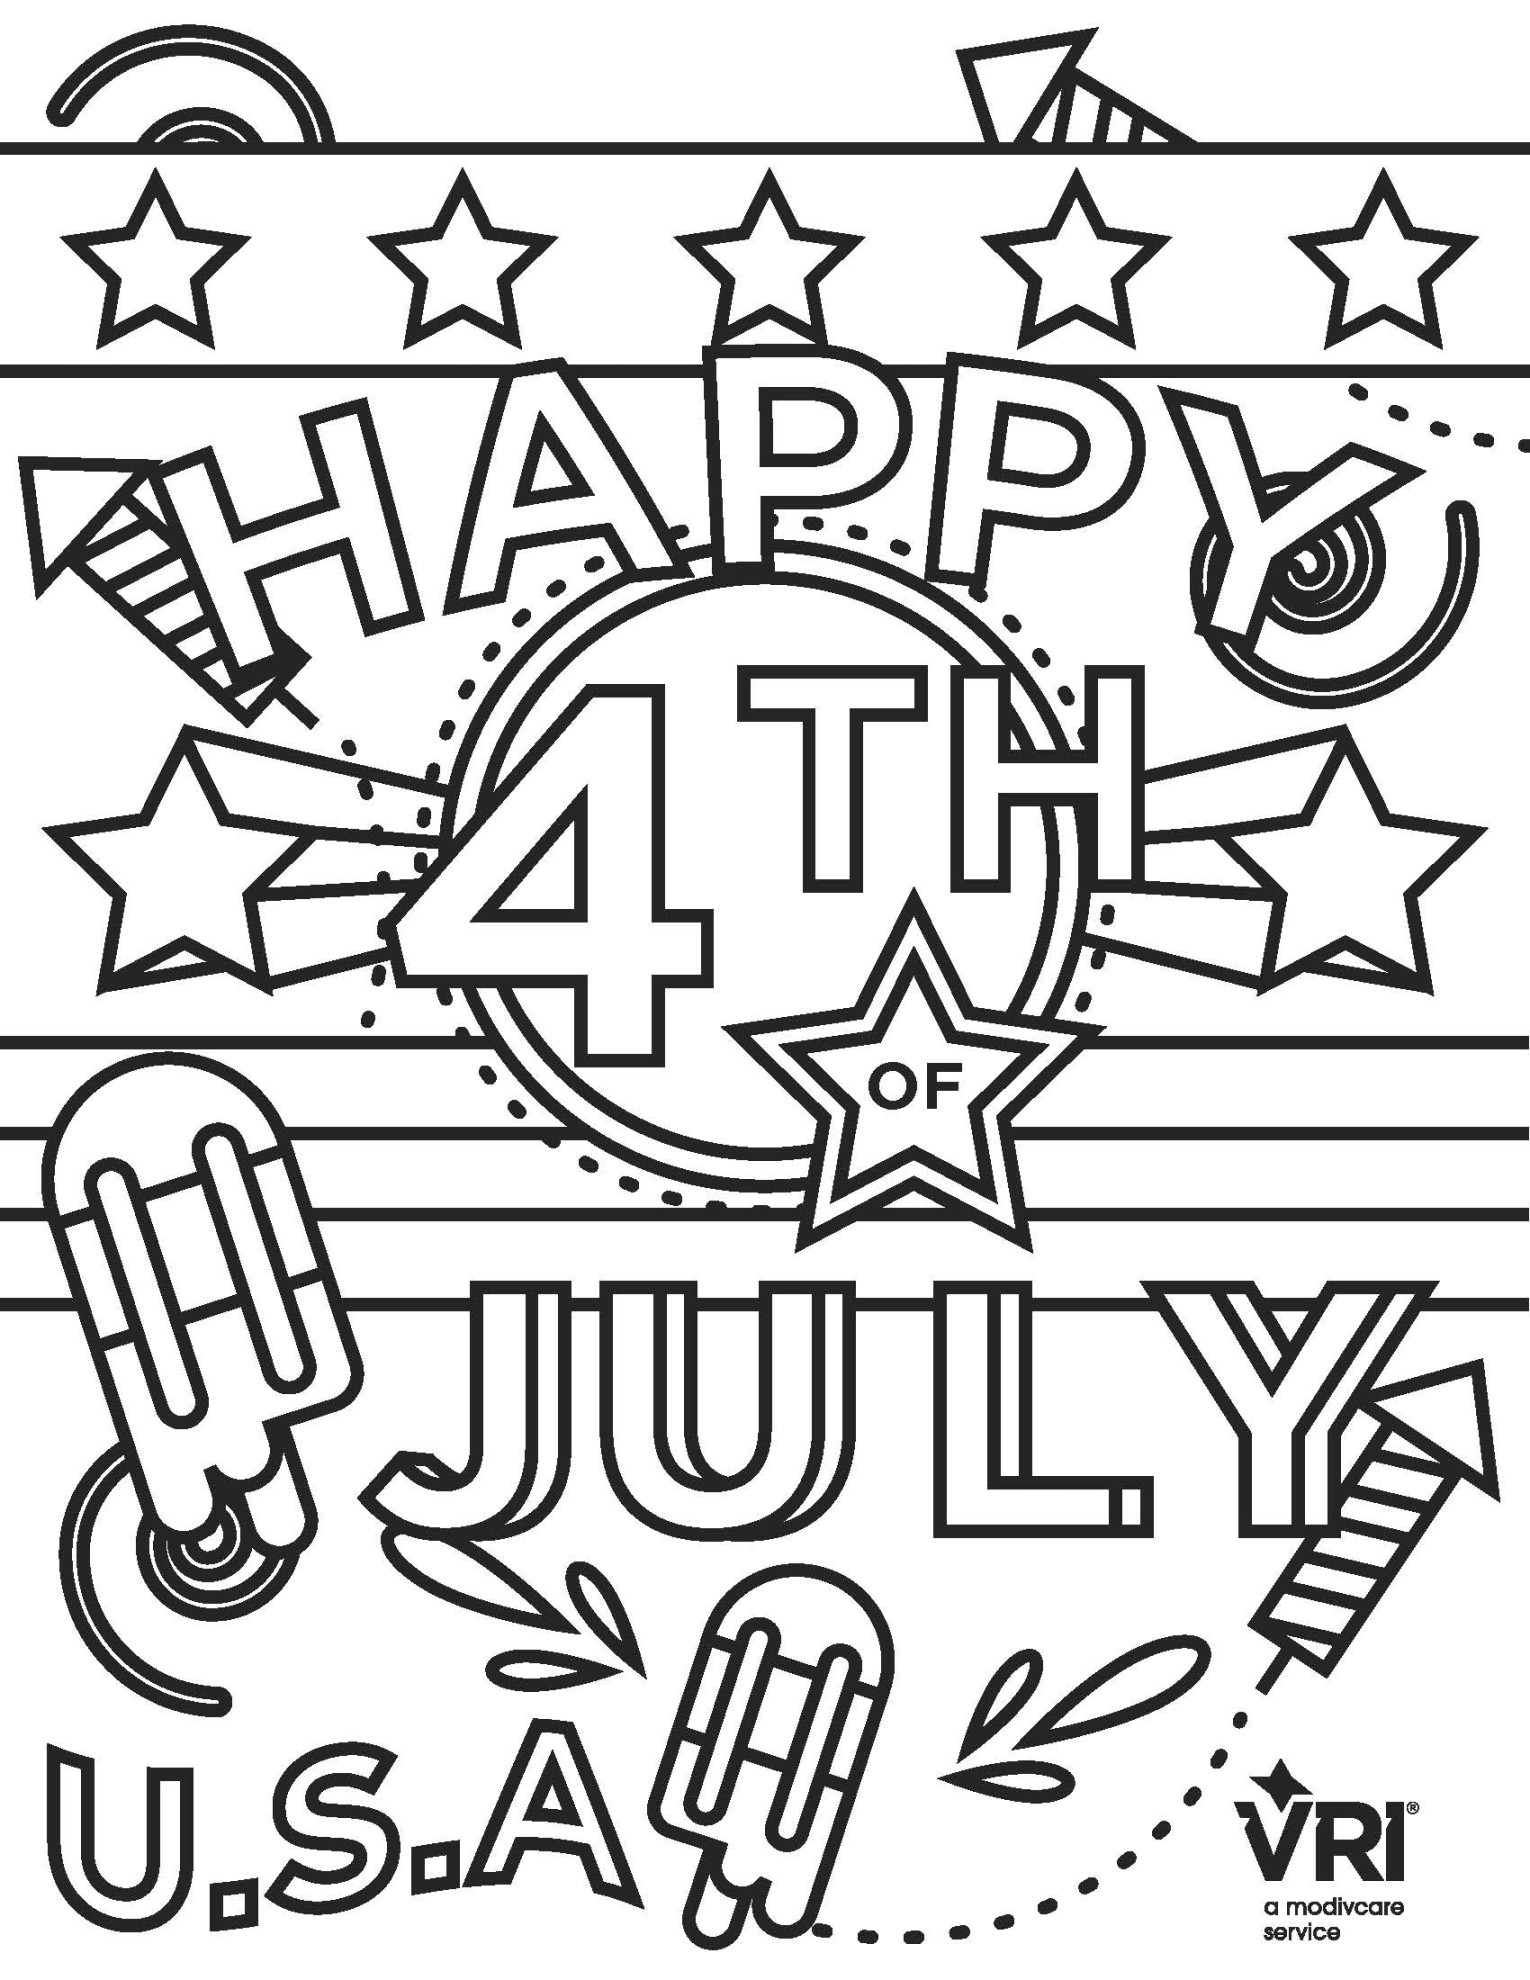 th of July Coloring Page - VRI